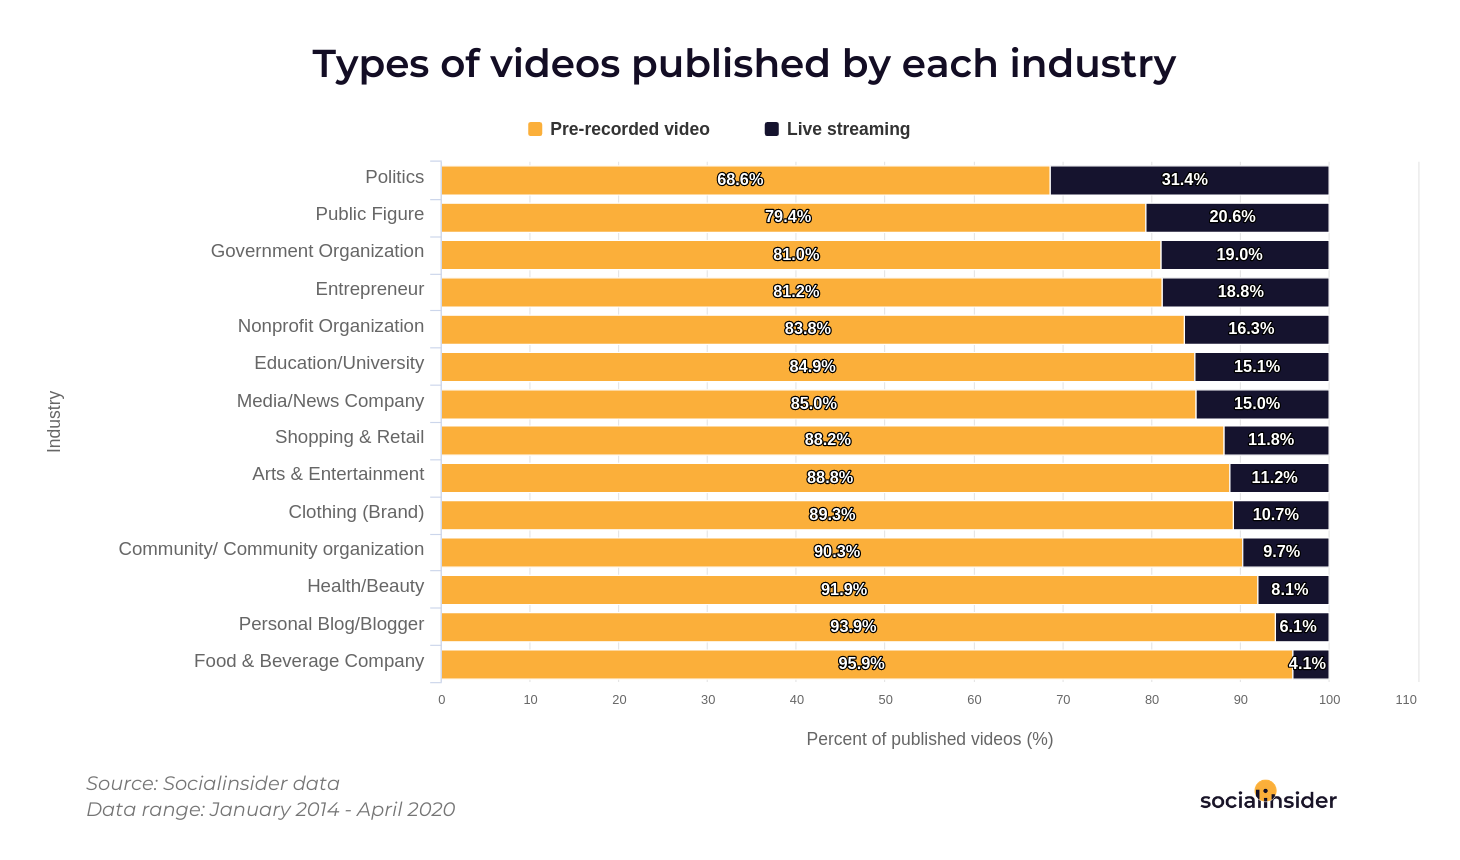 What types of videos each industry publishes.